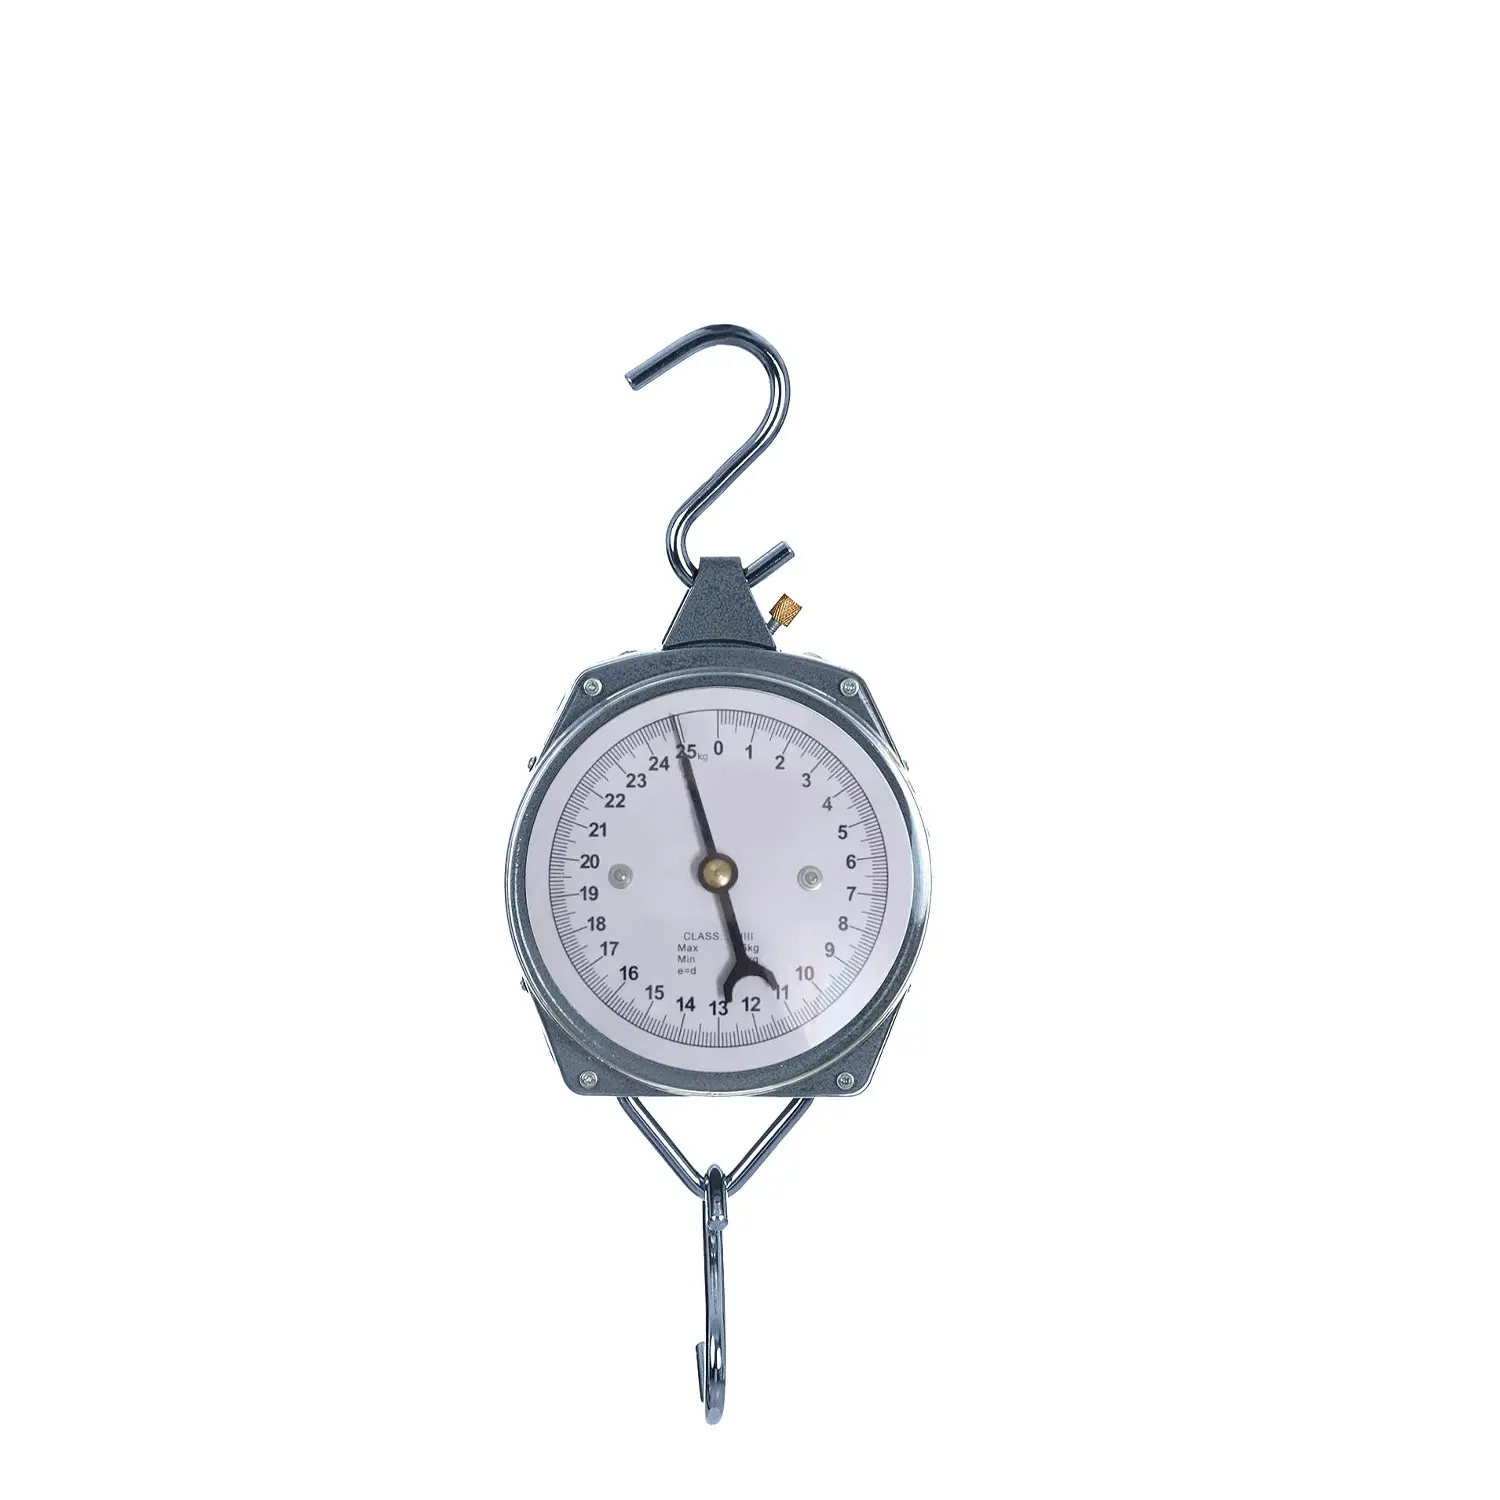 Mowell HANGING BABY Weighing Scale | Mechanical spring portable small high quality hanging hook scale